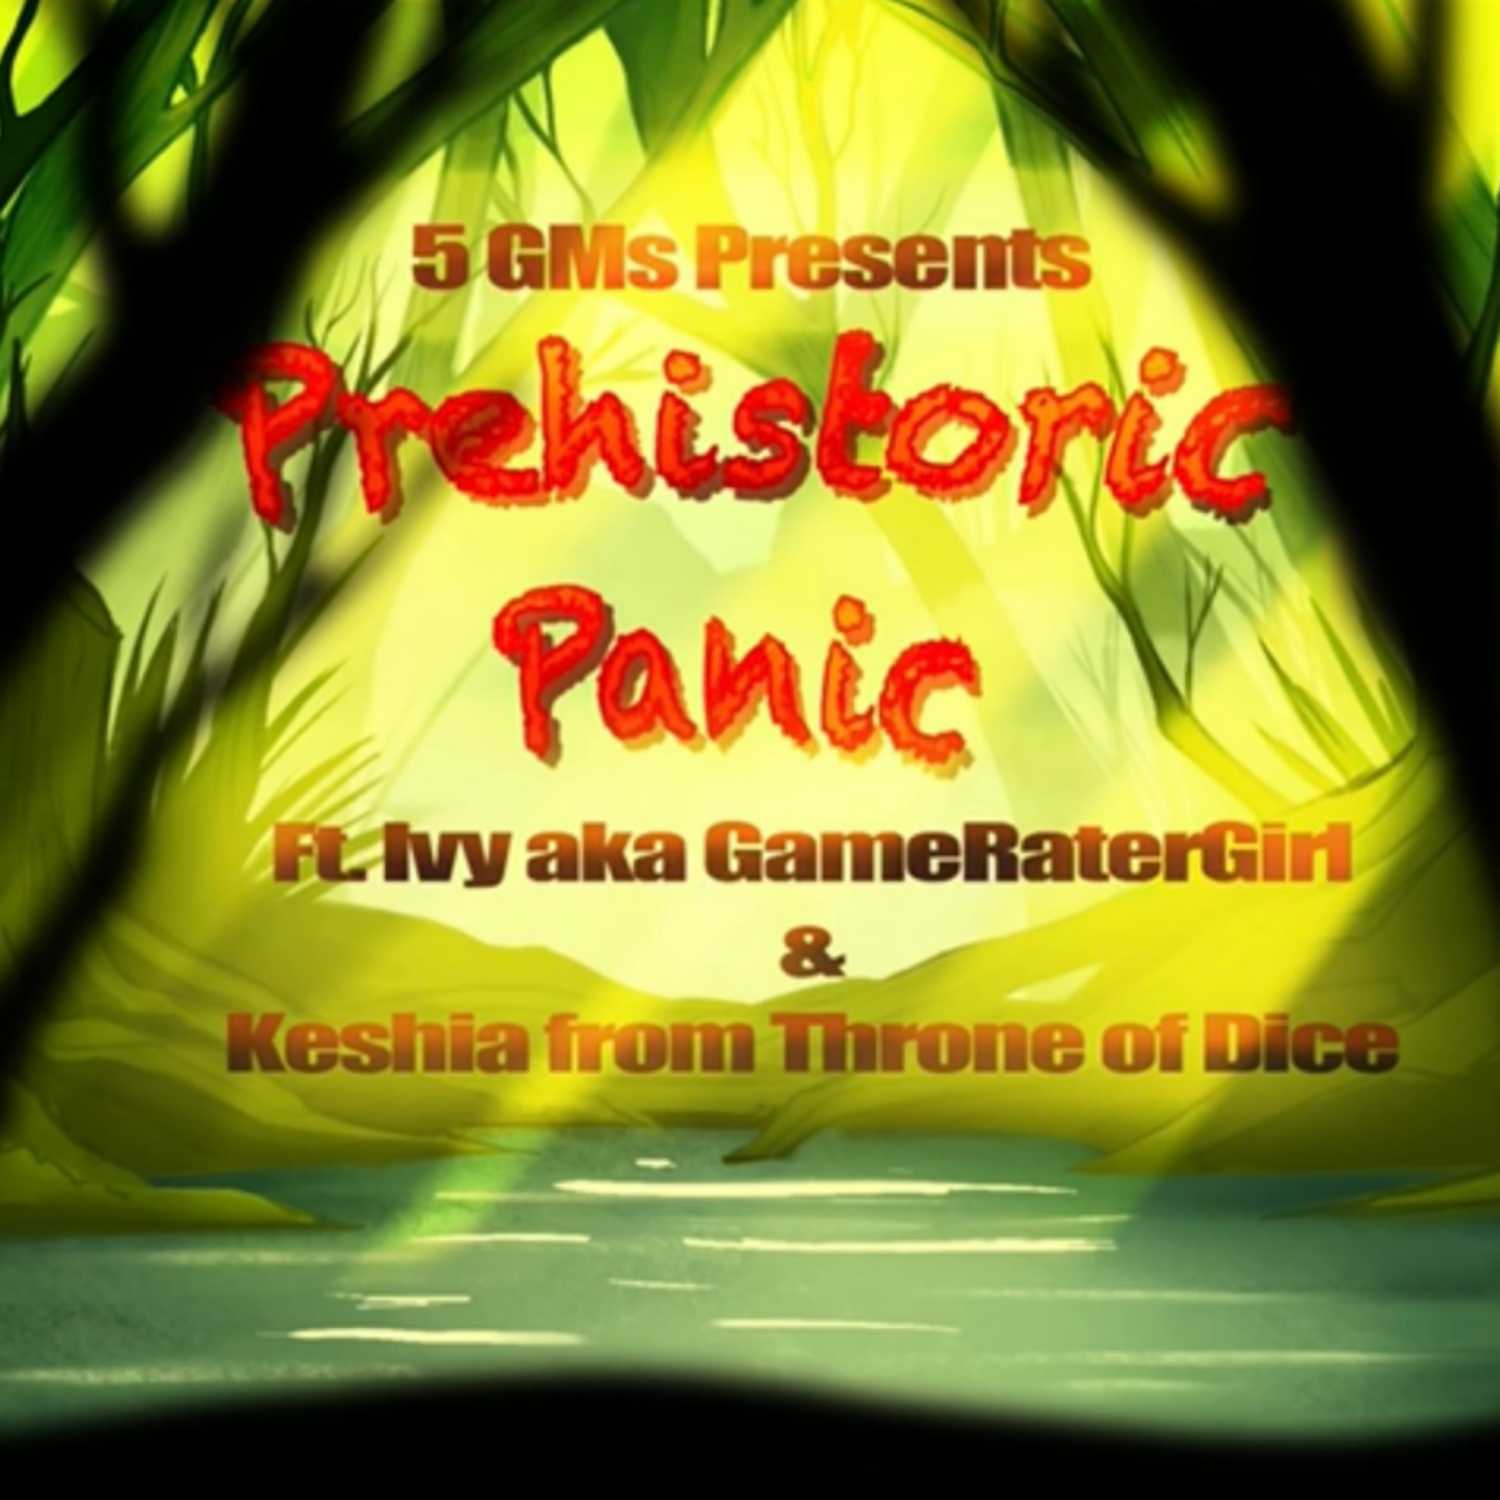 5 GMs Presents - Prehistoric Panic Ep. 4: Kill or Be Killed (w/GameRaterGirl and Keshia from Reel Scrolls Film Co.)